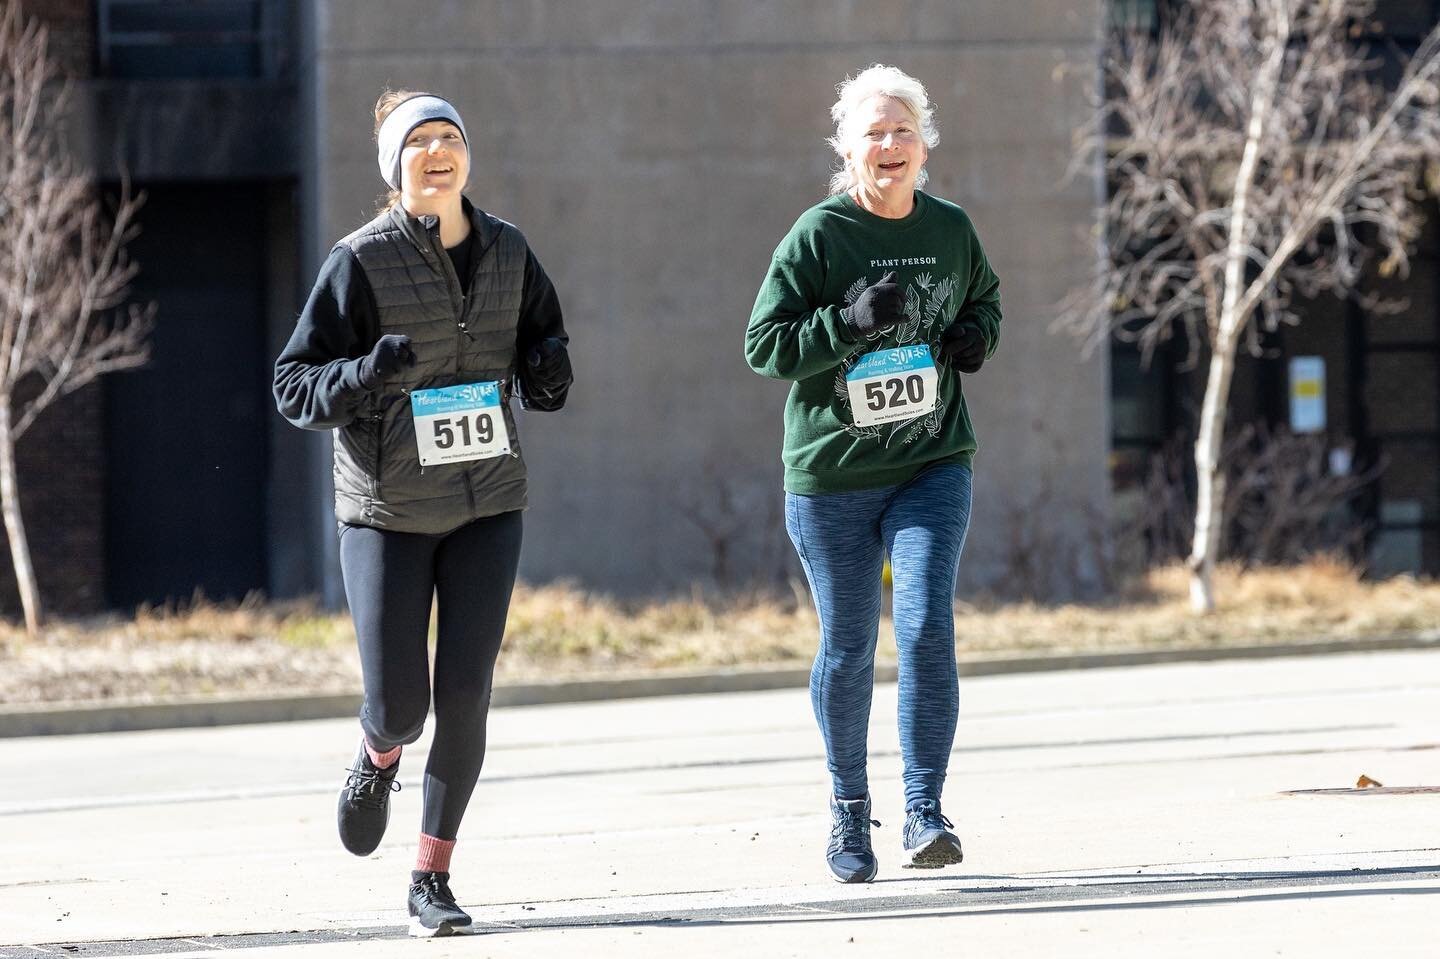 That feeling when race day is only a week away 🥳

You can still sign up! Lace up your shoes and join us for Doc Dash 2023!